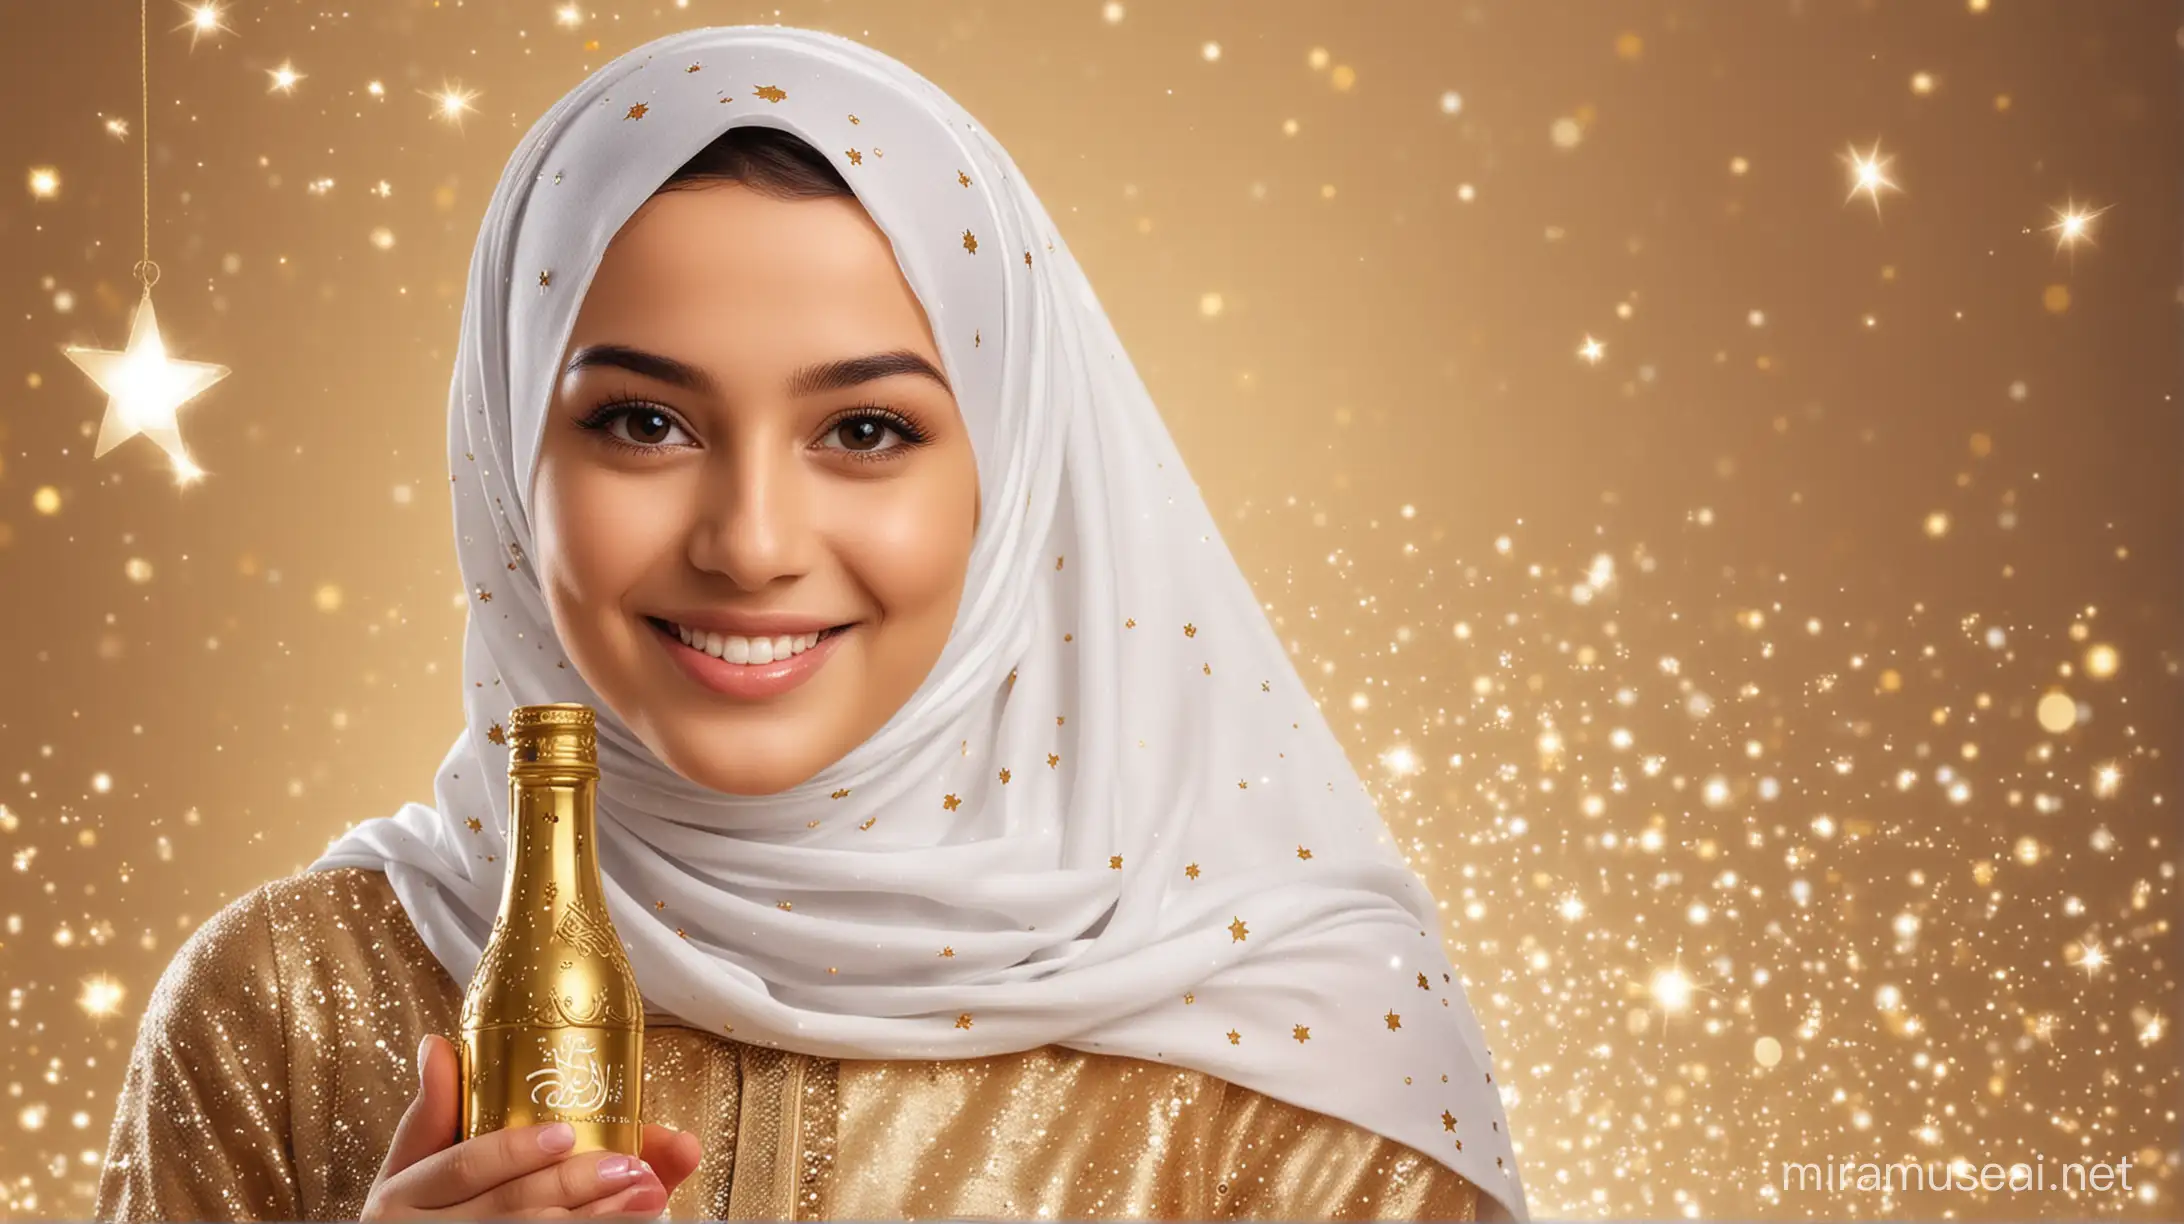 7 year only beautiful muslim girl wearing hijab with cute smile,white skin with eid festival background, with one bottle on hand, mid photo up to belley,graphics eid festival bg, glossy golden back ground with sparkles, and stars, boobs size 34